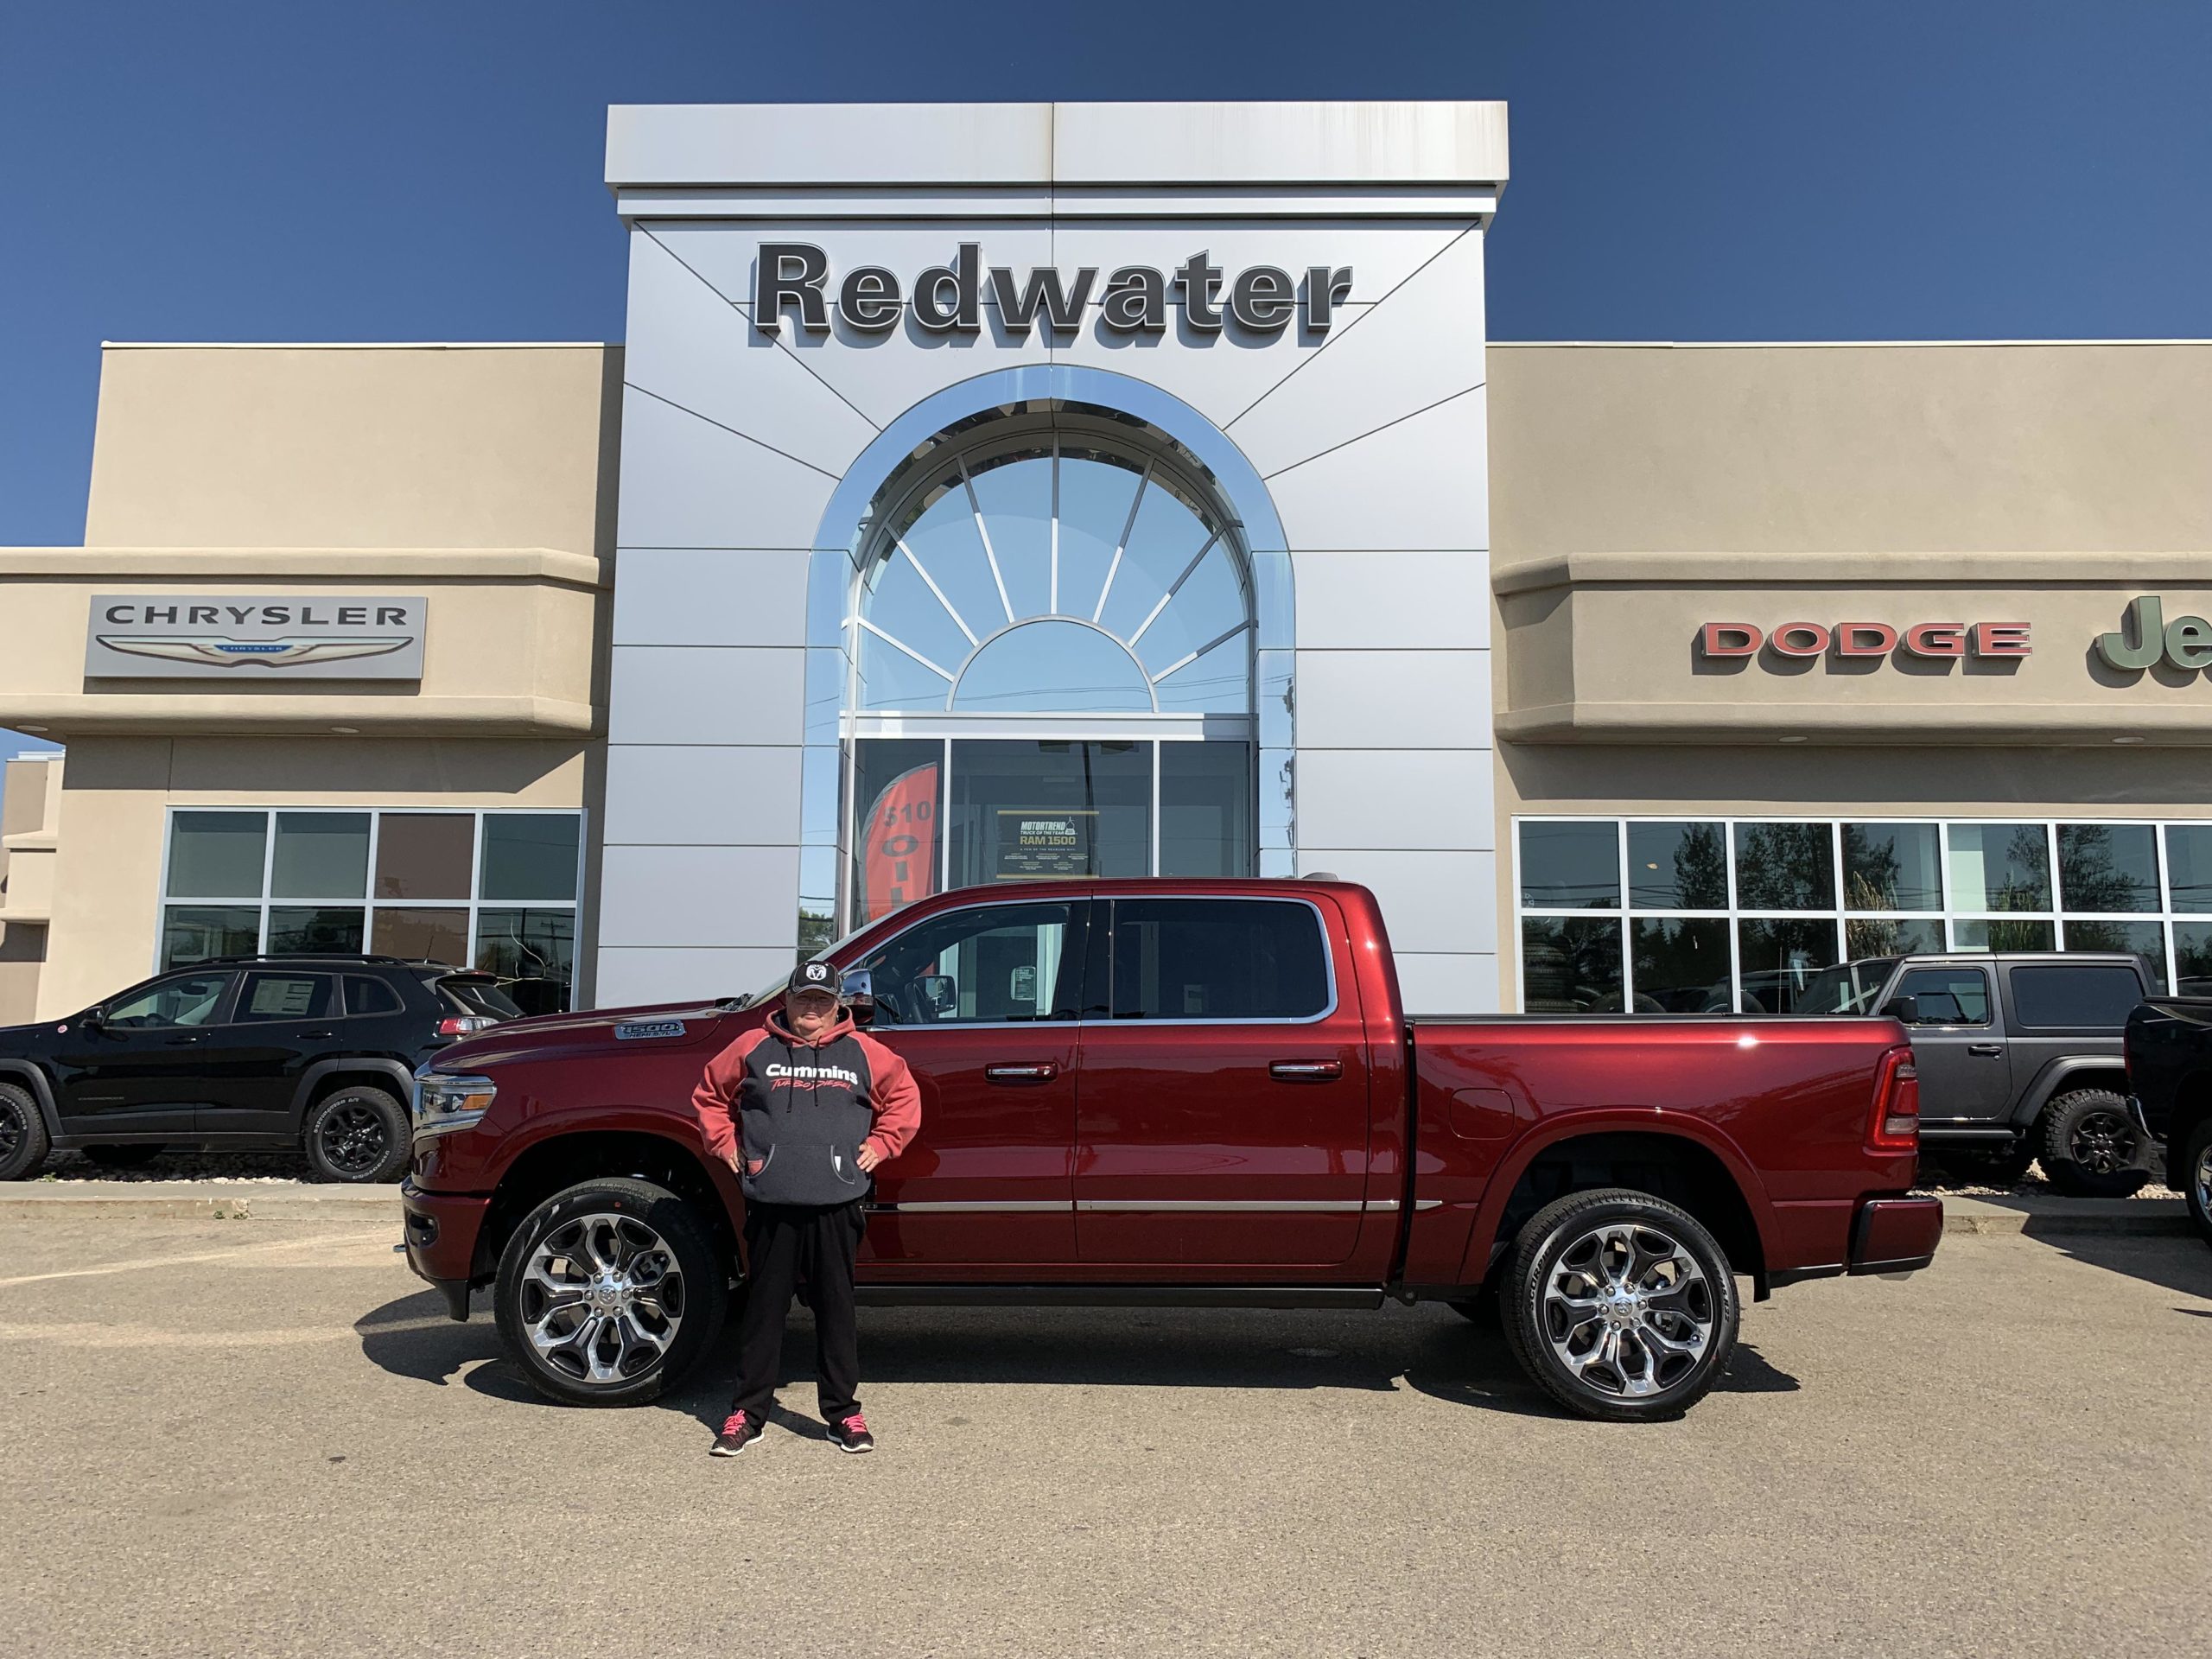 NR18793 New 2022 Ram 1500 Limited Crew Cab 4x4 Redwater Dodge